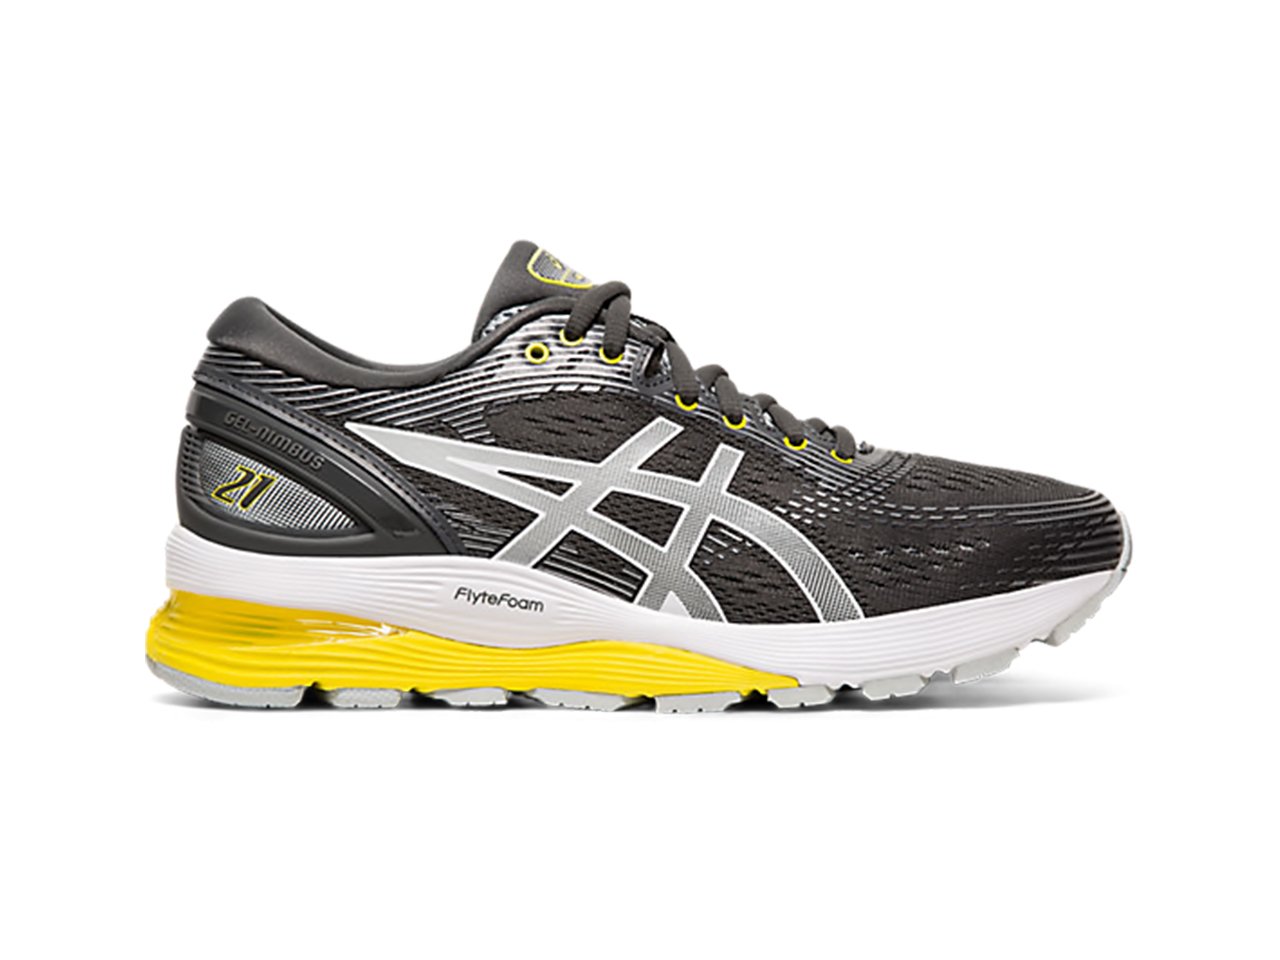 Great running shoes: right shoe of Asics GEL-NIMBUS 21—black upper, yellow sole